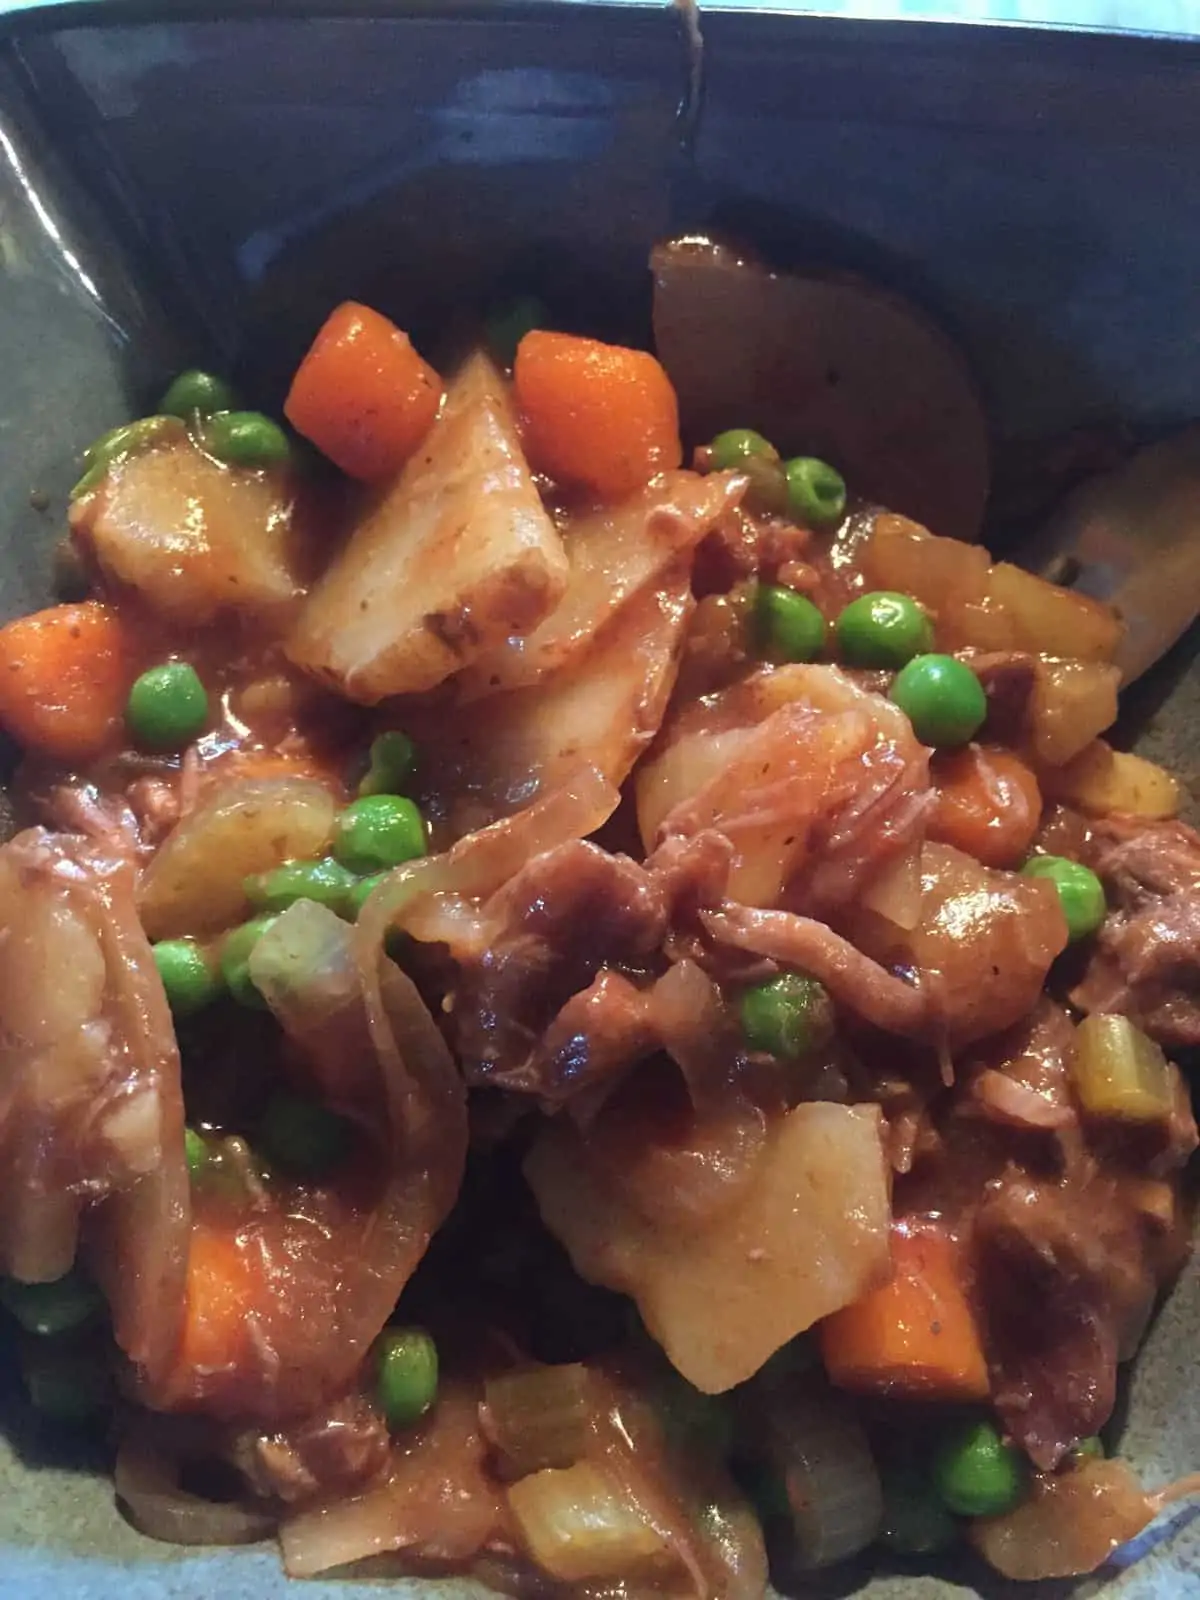 How To Make Your Entire Family Happy With This Super Easy, Gluten Free Beef Stew